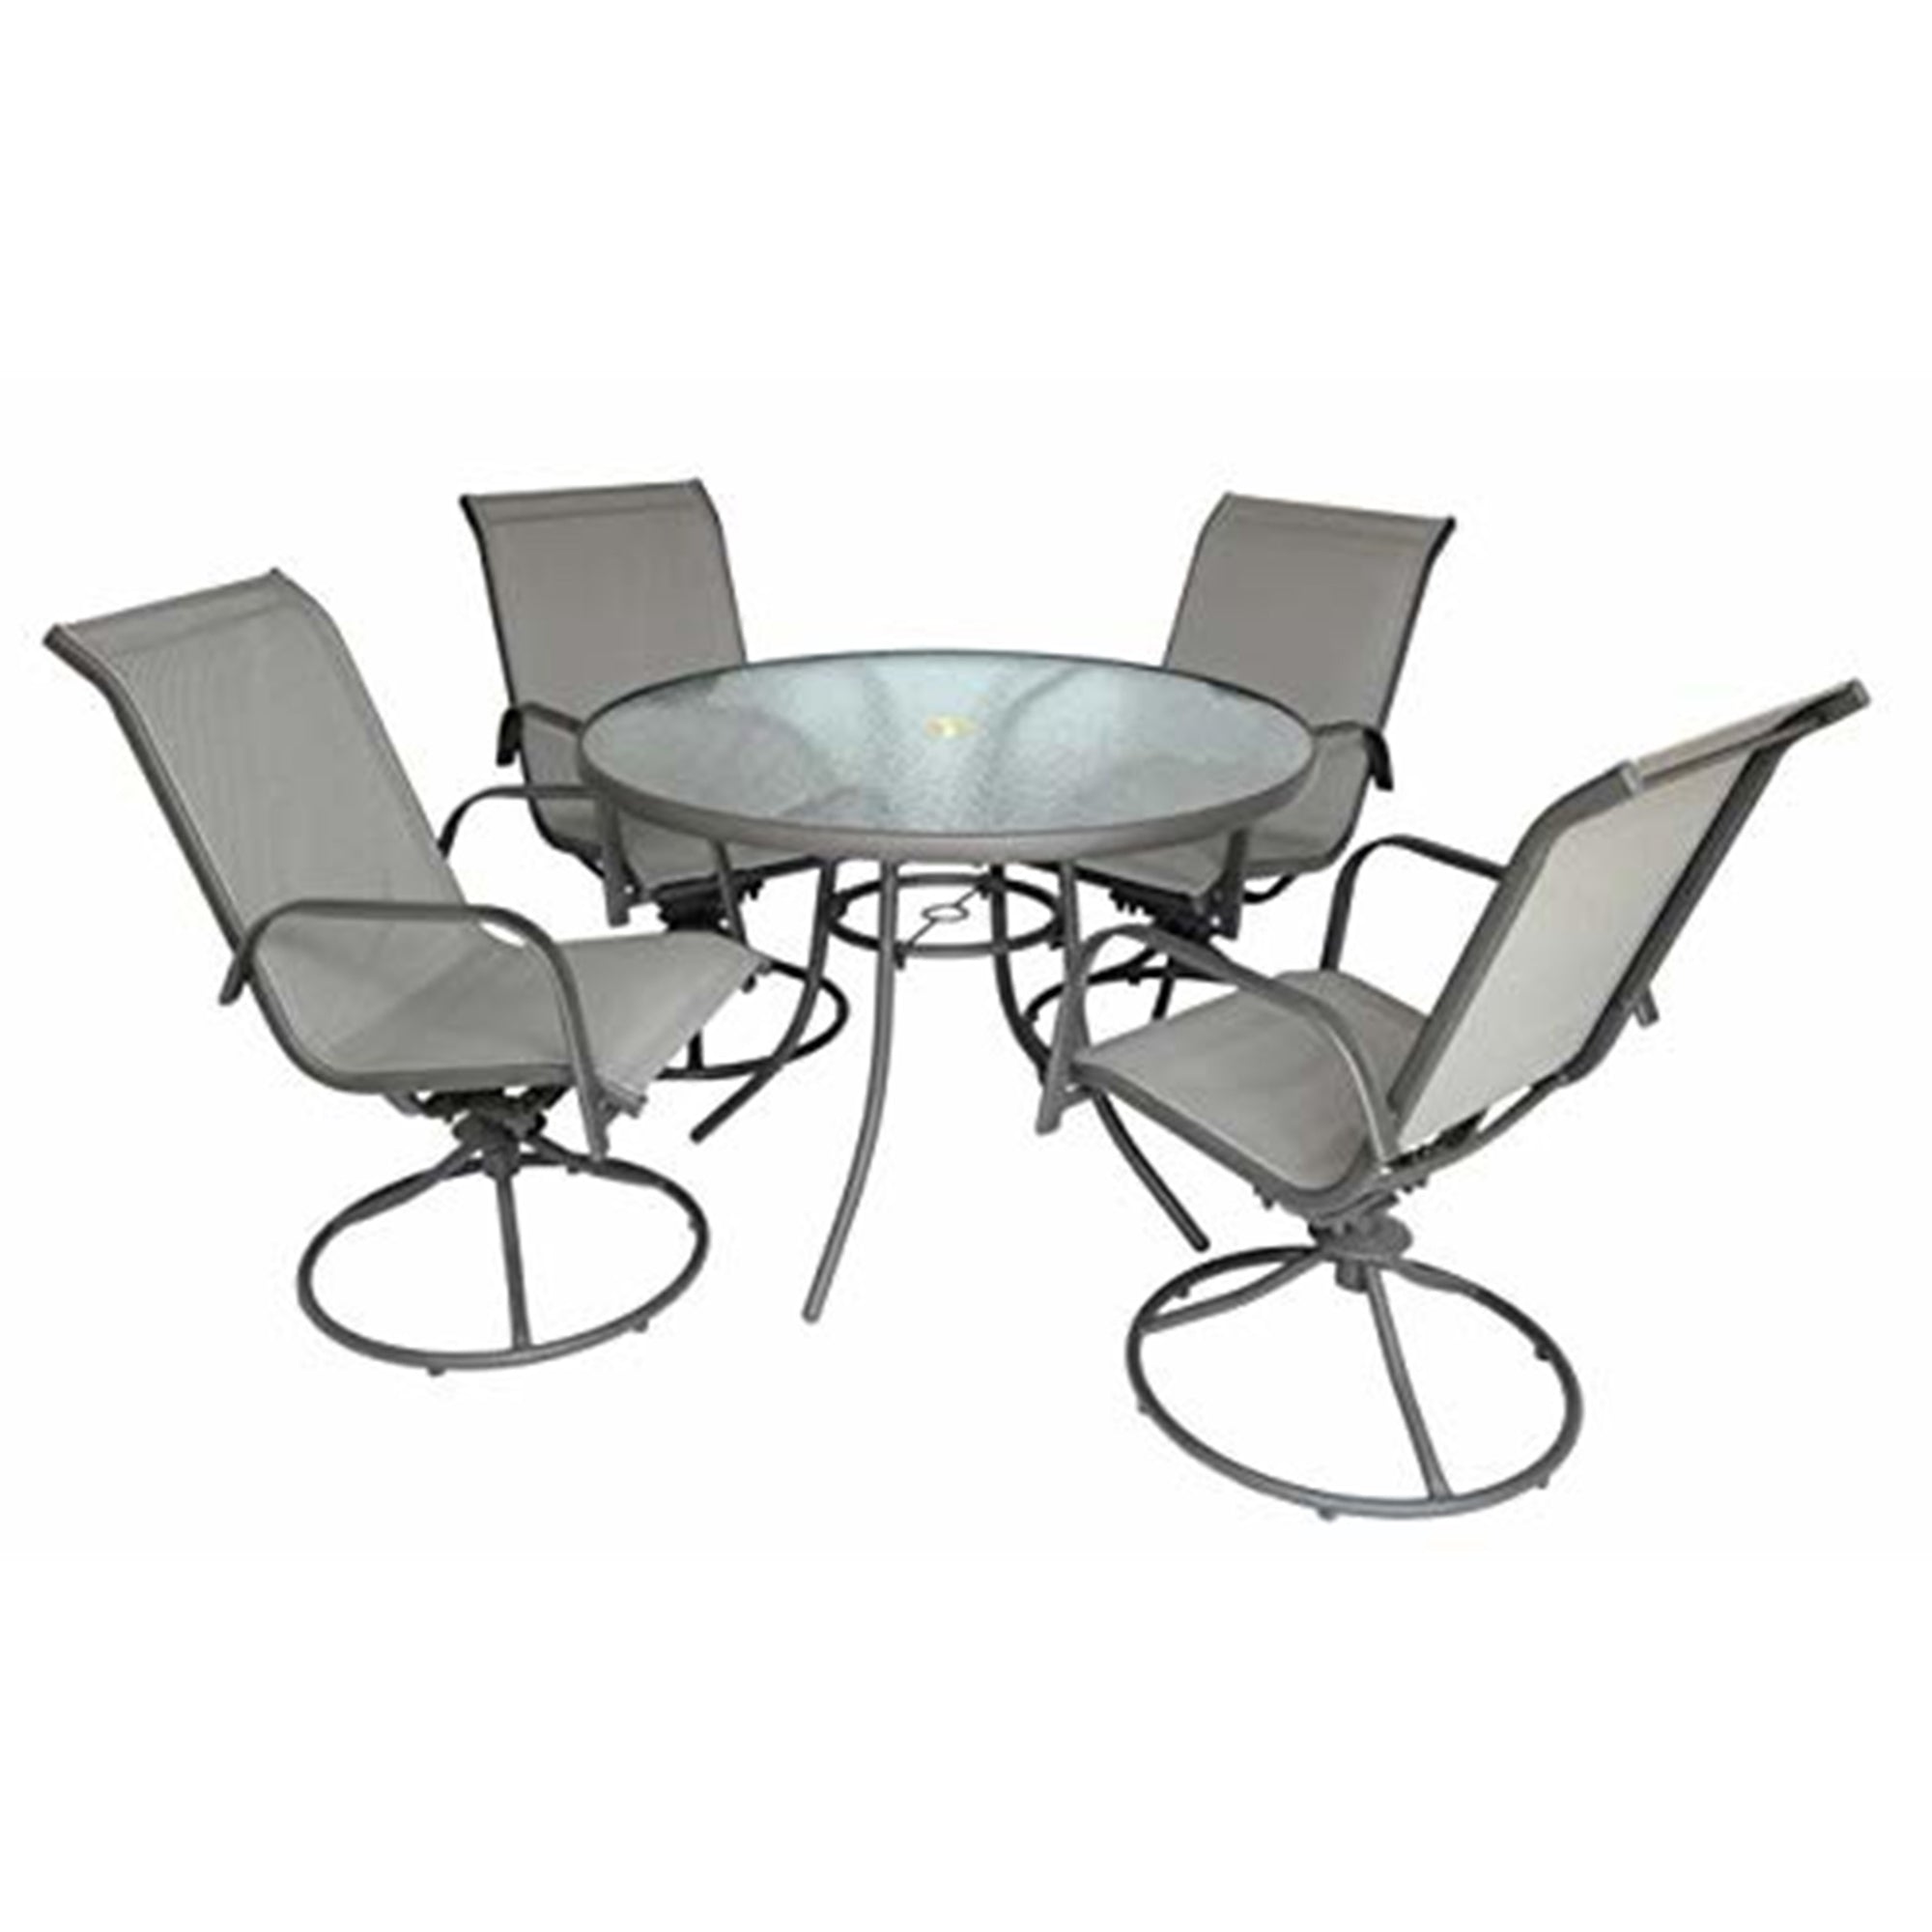 Courtyard Creations Sienna Outdoor Collection 5 Piece Patio Set, Glass Top Steel Table and 4 Chairs (Gray)